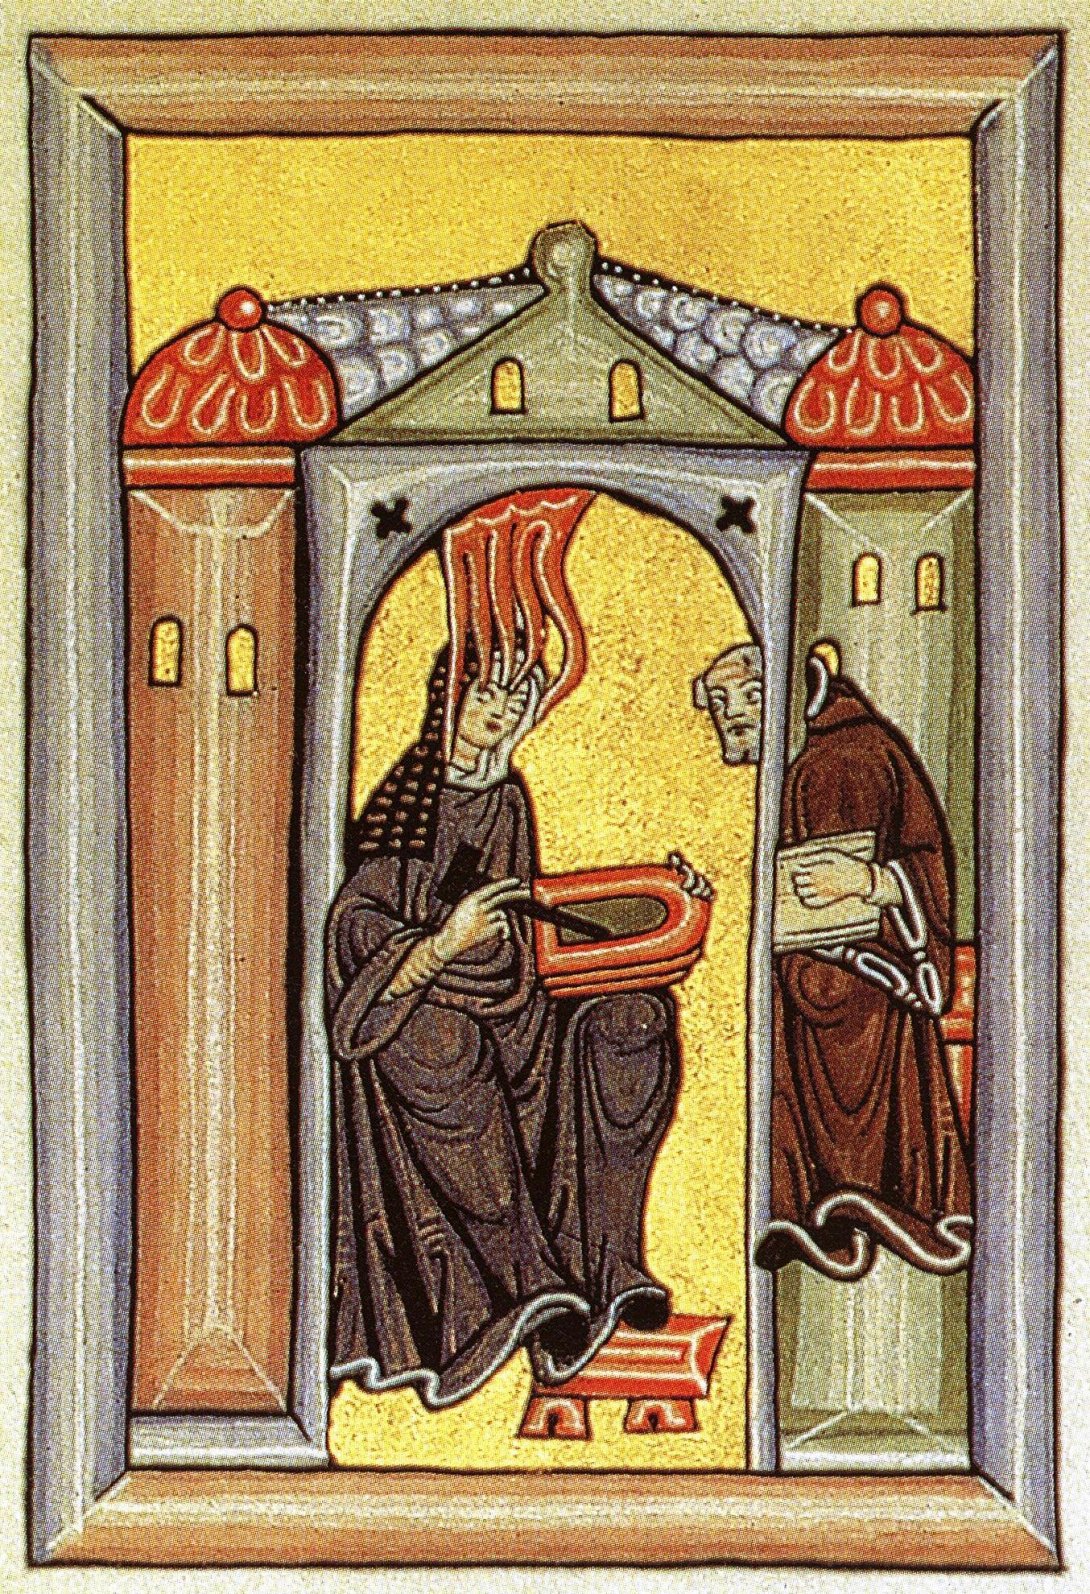 Image of an illumination featuring two people, a nun and a monk. The nun rests her feet on a stool